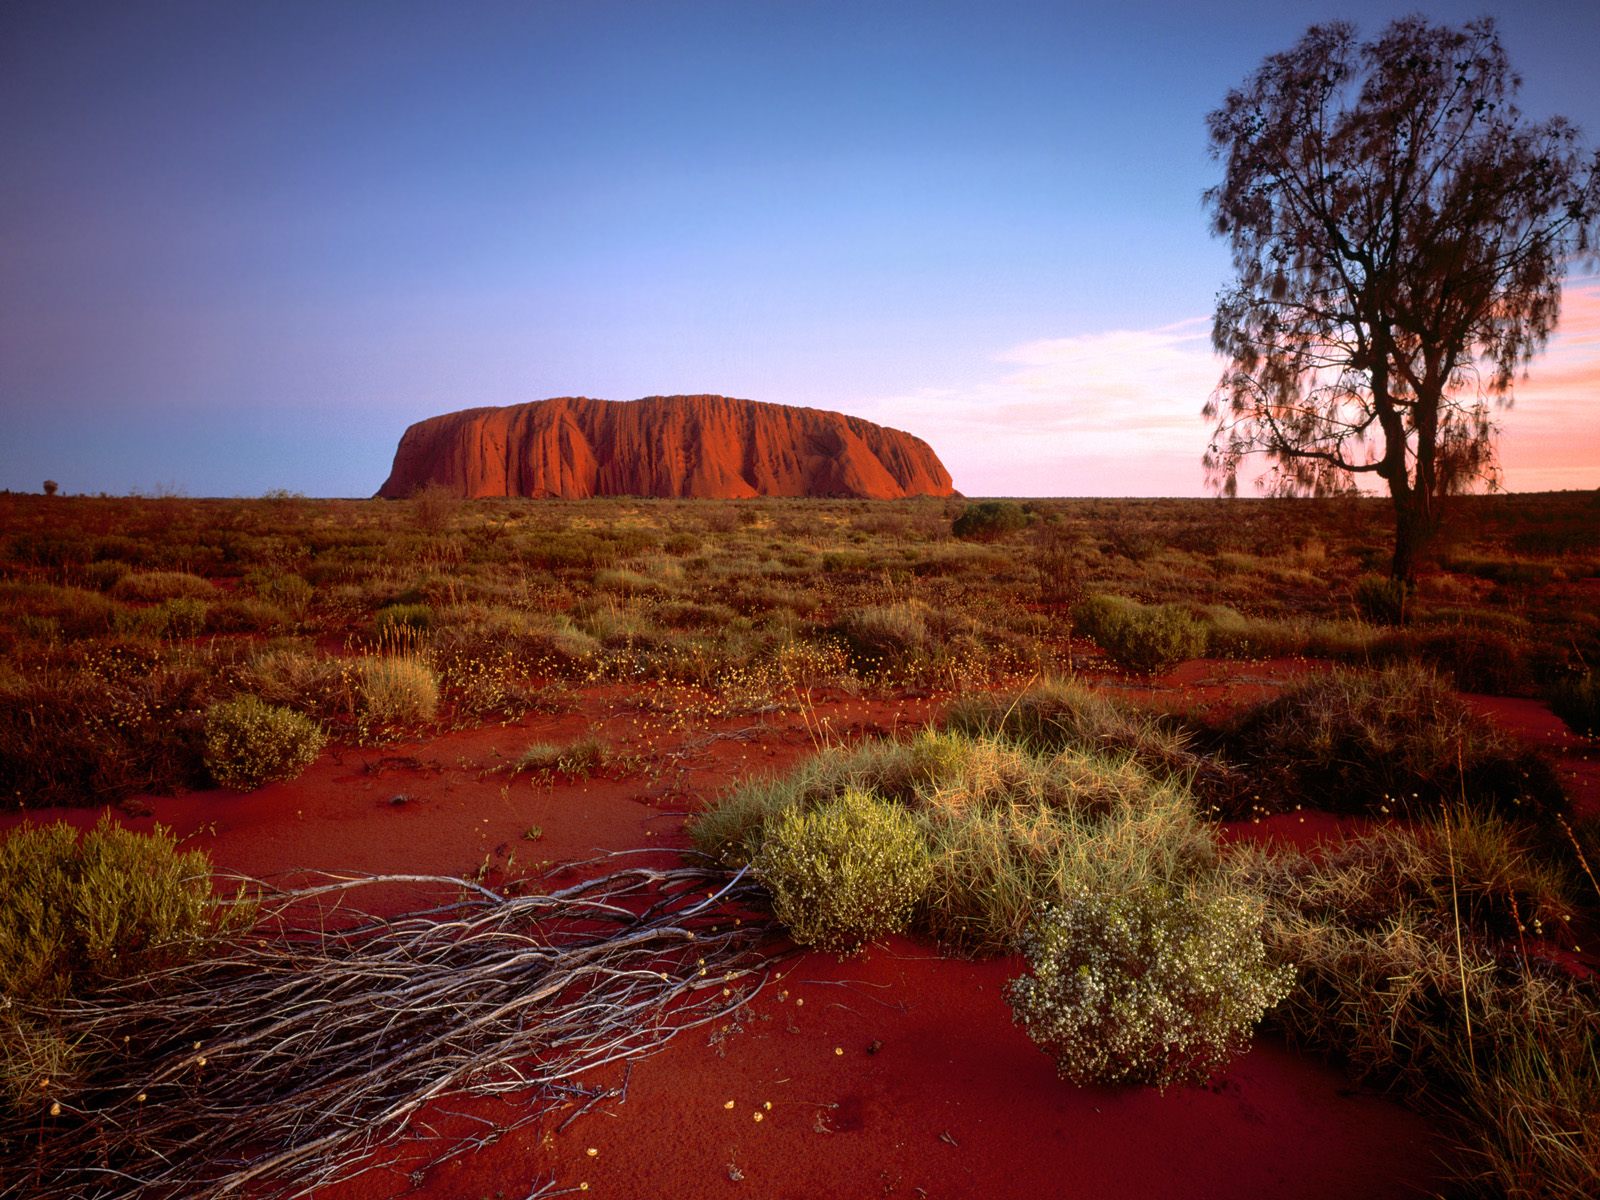 http://ayay.co.uk/backgrounds/nature/mountains/Ayers-Rock-Northern-Territory-Australia.jpg